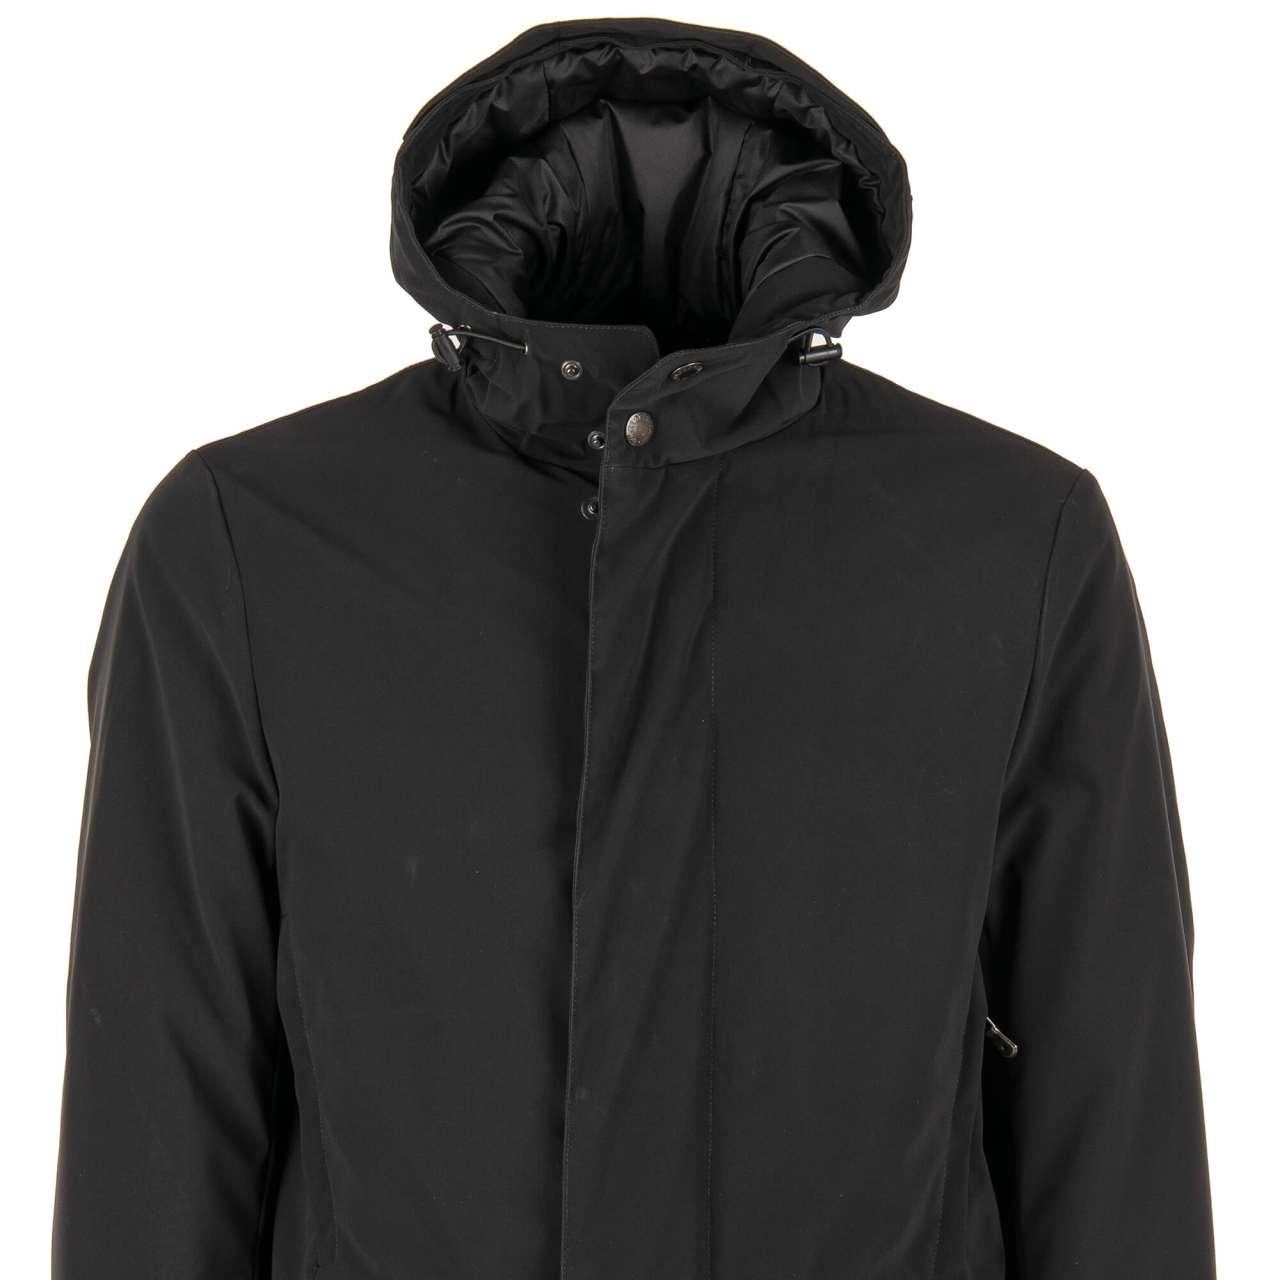 Dolce & Gabbana Classic Hooded Parka Jacket with Pockets and Logo Black 46 S For Sale 2